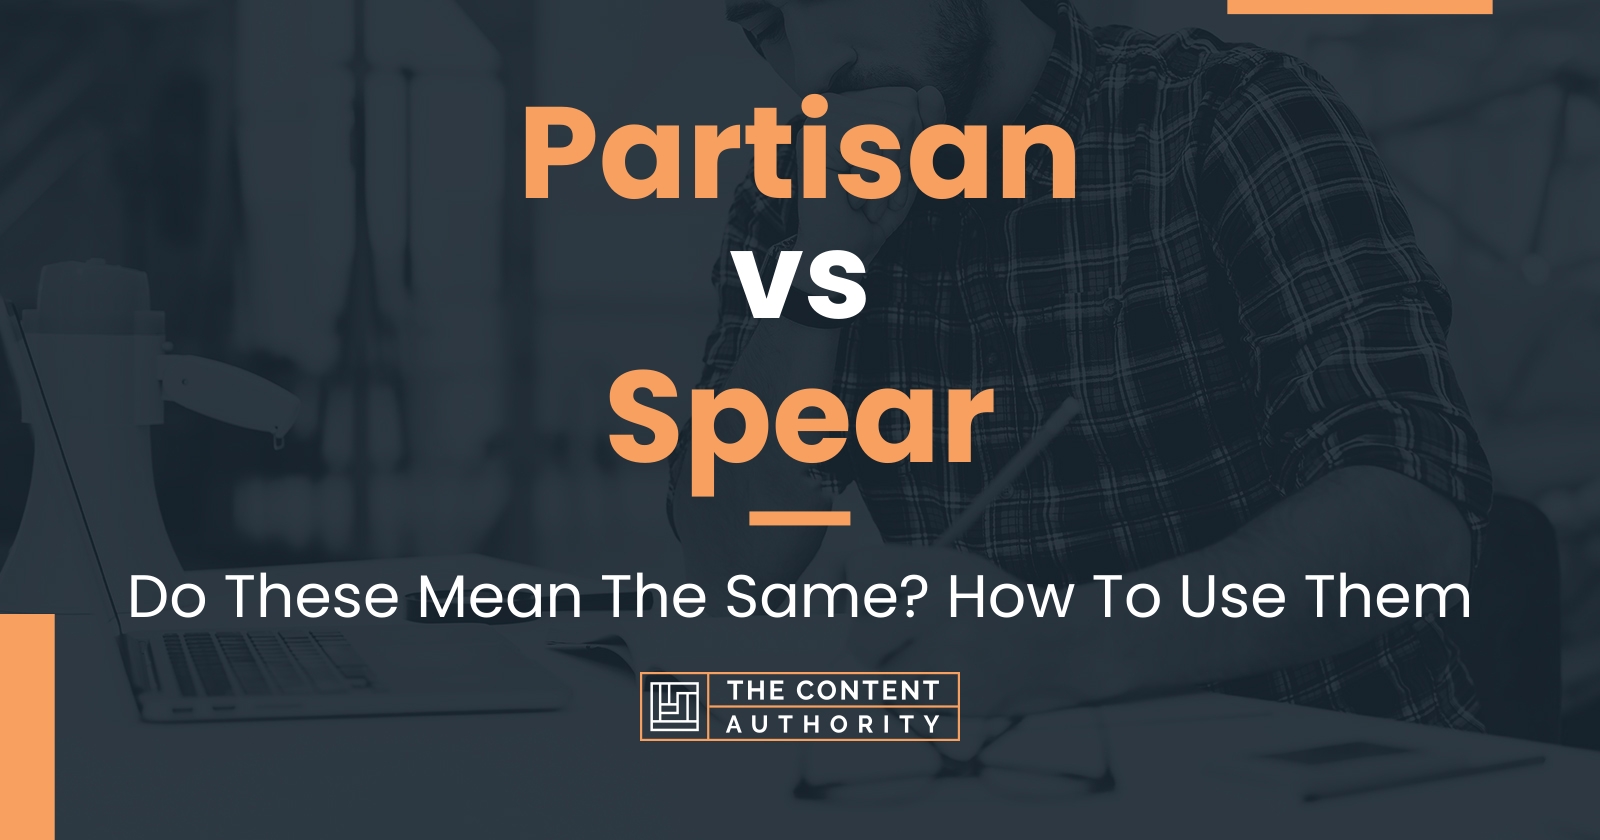 Partisan vs Spear: Do These Mean The Same? How To Use Them